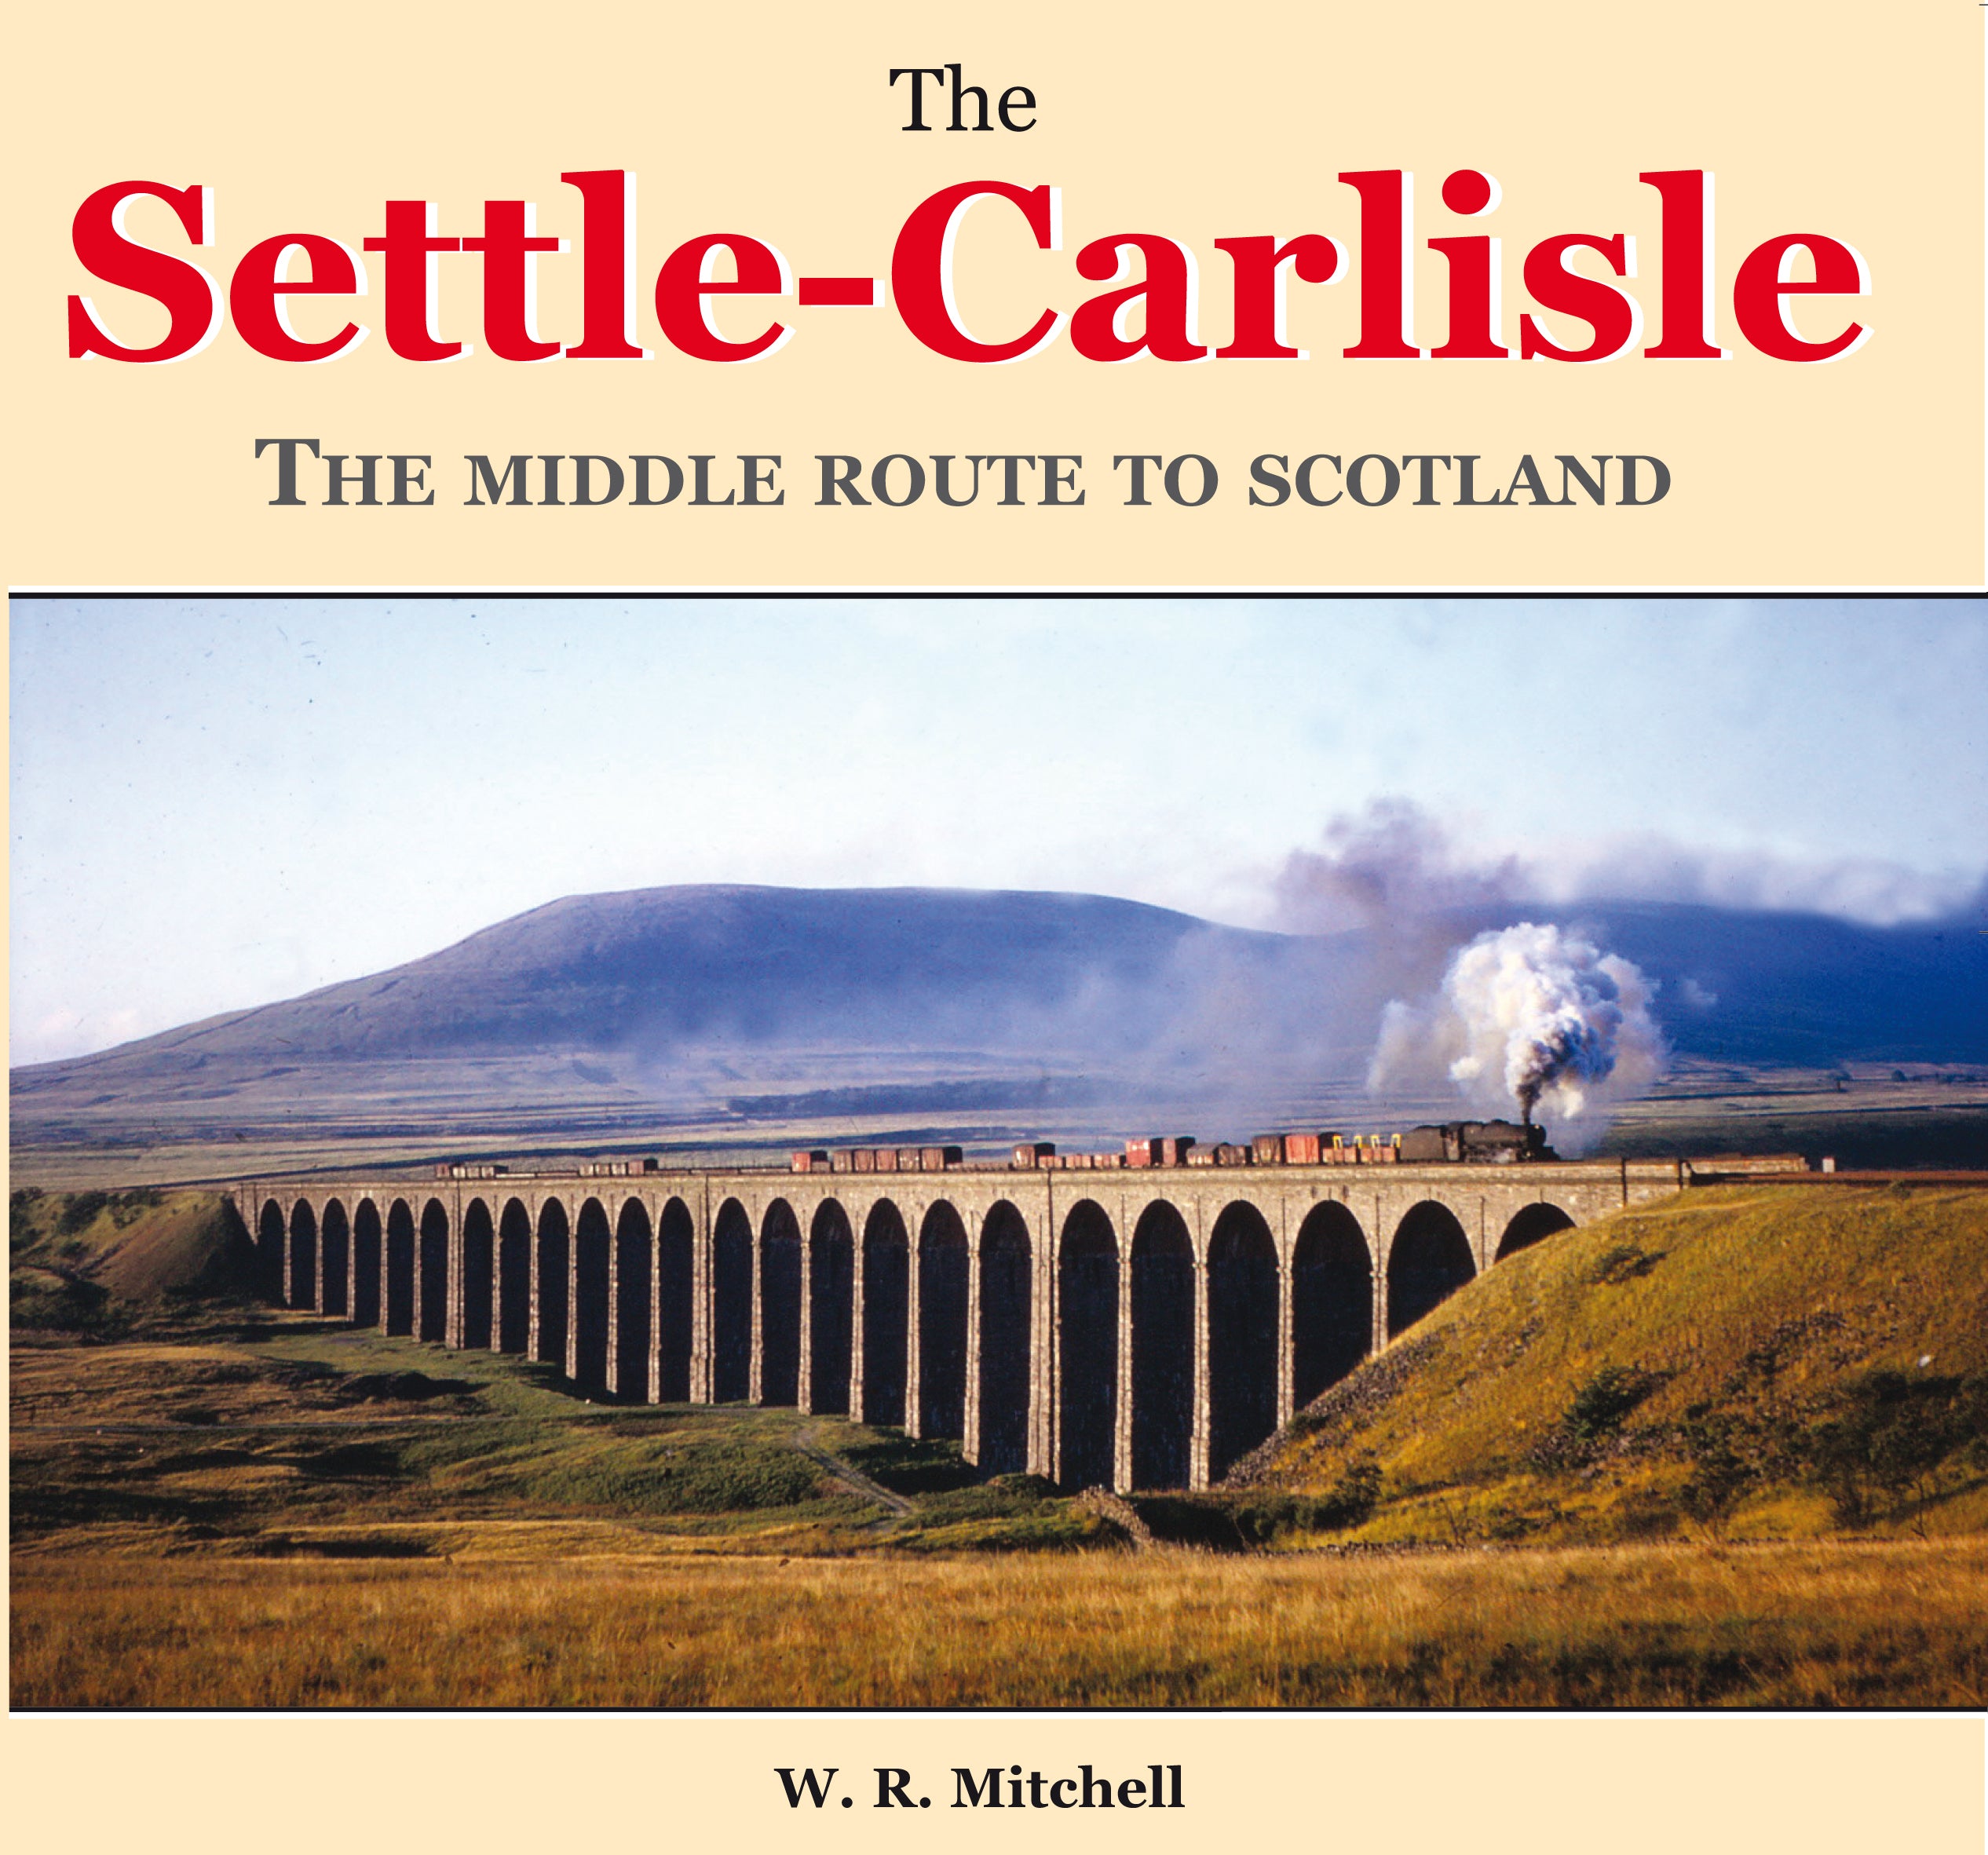 The Settle-Carlisle – The Middle Route to Scotland